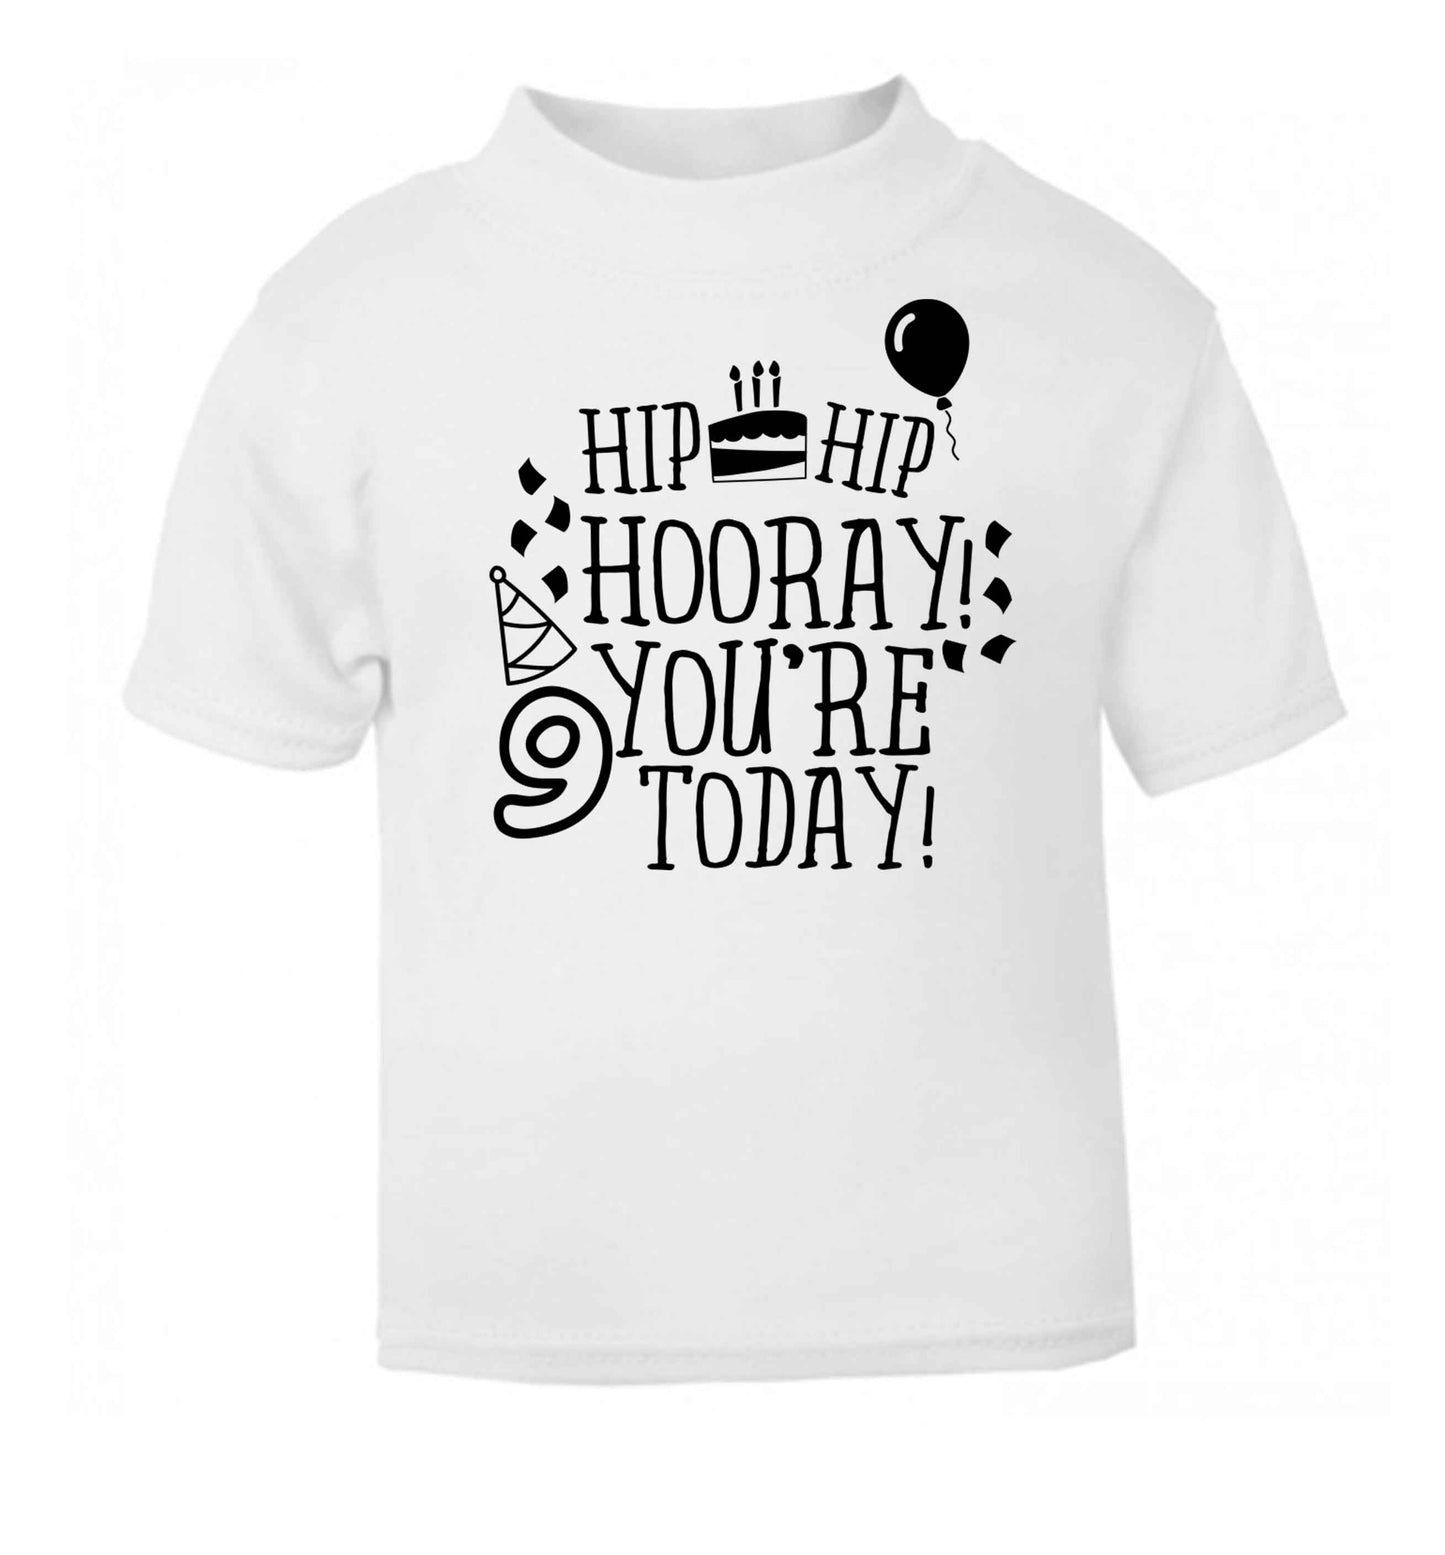 Hip hip hooray you're 9 today! white baby toddler Tshirt 2 Years